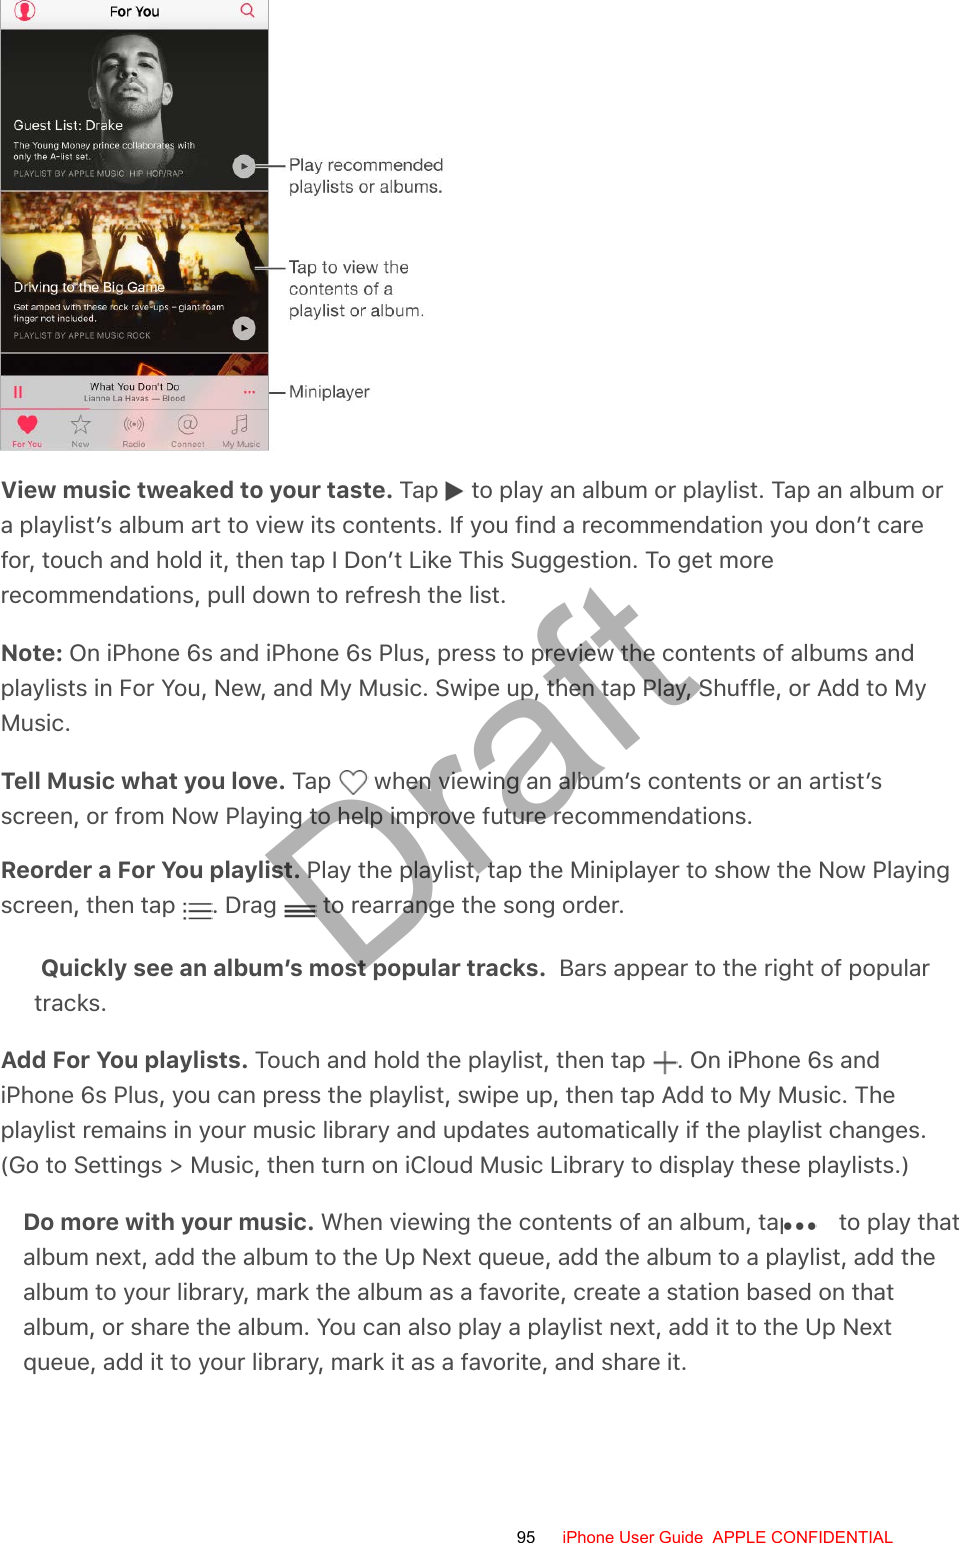 View music tweaked to your taste. Tap   to play an album or playlist. Tap an album ora playlist’s album art to view its contents. If you find a recommendation you don’t carefor, touch and hold it, then tap I Don’t Like This Suggestion. To get morerecommendations, pull down to refresh the list.Note: On iPhone 6s and iPhone 6s Plus, press to preview the contents of albums andplaylists in For You, New, and My Music. Swipe up, then tap Play, Shuffle, or Add to MyMusic.Tell Music what you love. Tap   when viewing an album’s contents or an artist’sscreen, or from Now Playing to help improve future recommendations.Reorder a For You playlist. Play the playlist, tap the Miniplayer to show the Now Playingscreen, then tap  . Drag   to rearrange the song order.Quickly see an album’s most popular tracks.  Bars appear to the right of populartracks.Add For You playlists. Touch and hold the playlist, then tap  . On iPhone 6s andiPhone 6s Plus, you can press the playlist, swipe up, then tap Add to My Music. Theplaylist remains in your music library and updates automatically if the playlist changes.(Go to Settings &gt; Music, then turn on iCloud Music Library to display these playlists.)Do more with your music. When viewing the contents of an album, tap   to play thatalbum next, add the album to the Up Next queue, add the album to a playlist, add thealbum to your library, mark the album as a favorite, create a station based on thatalbum, or share the album. You can also play a playlist next, add it to the Up Nextqueue, add it to your library, mark it as a favorite, and share it.95 iPhone User Guide  APPLE CONFIDENTIALDraft